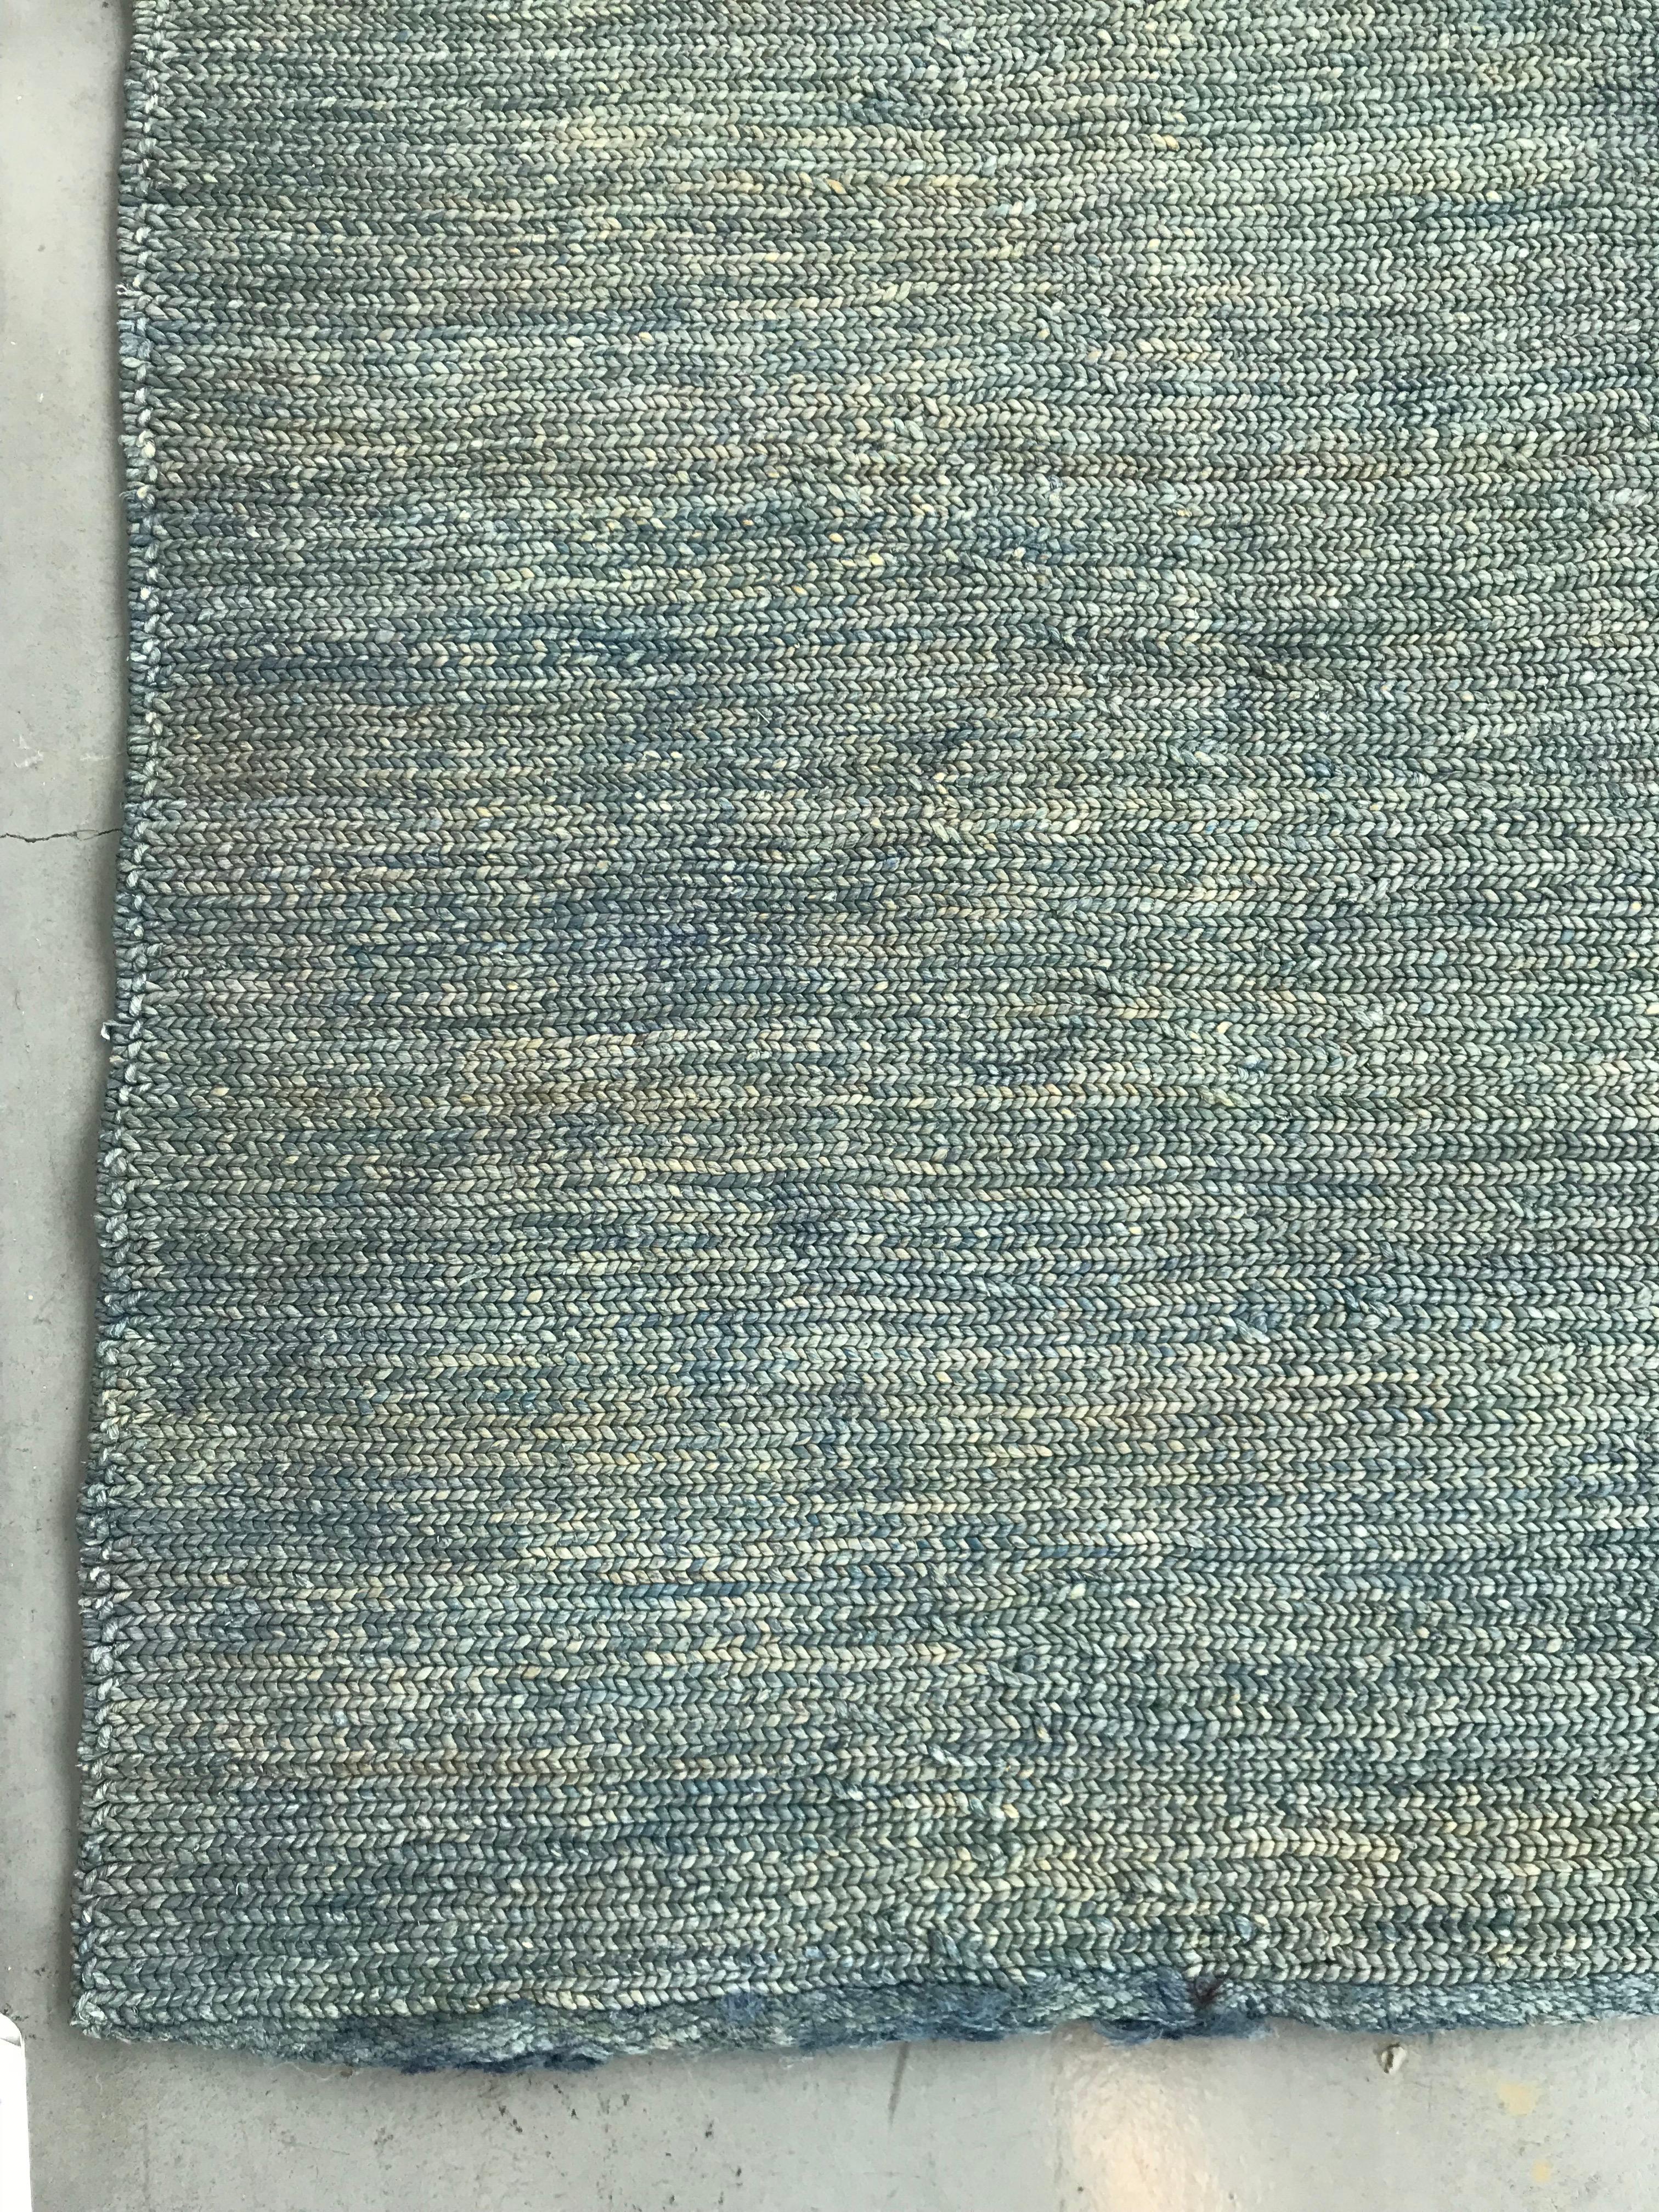 (Small) Turkish blue cotton and linen rug found in France.